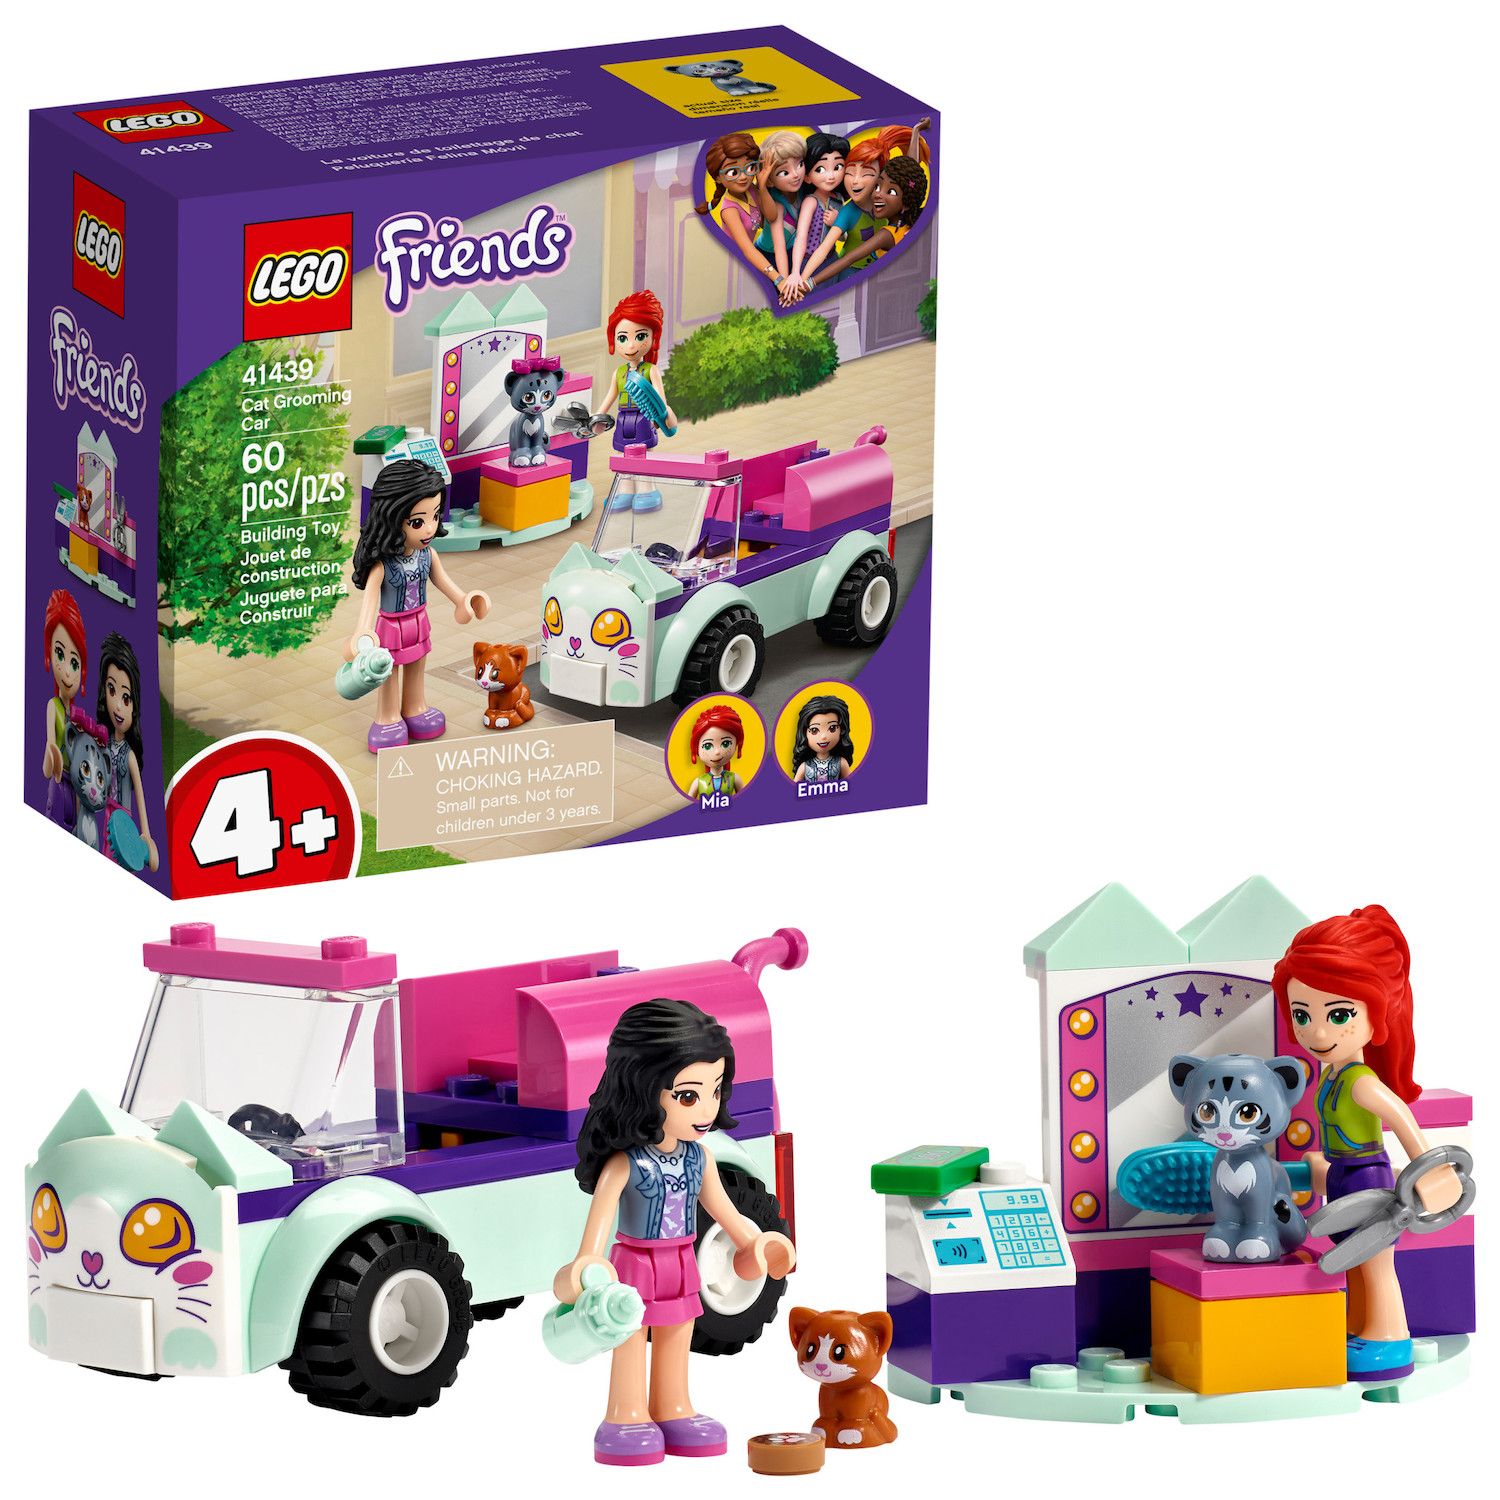 Image for LEGO Friends Cat Grooming Car Set 41439 (60 pieces) at Kohl's.